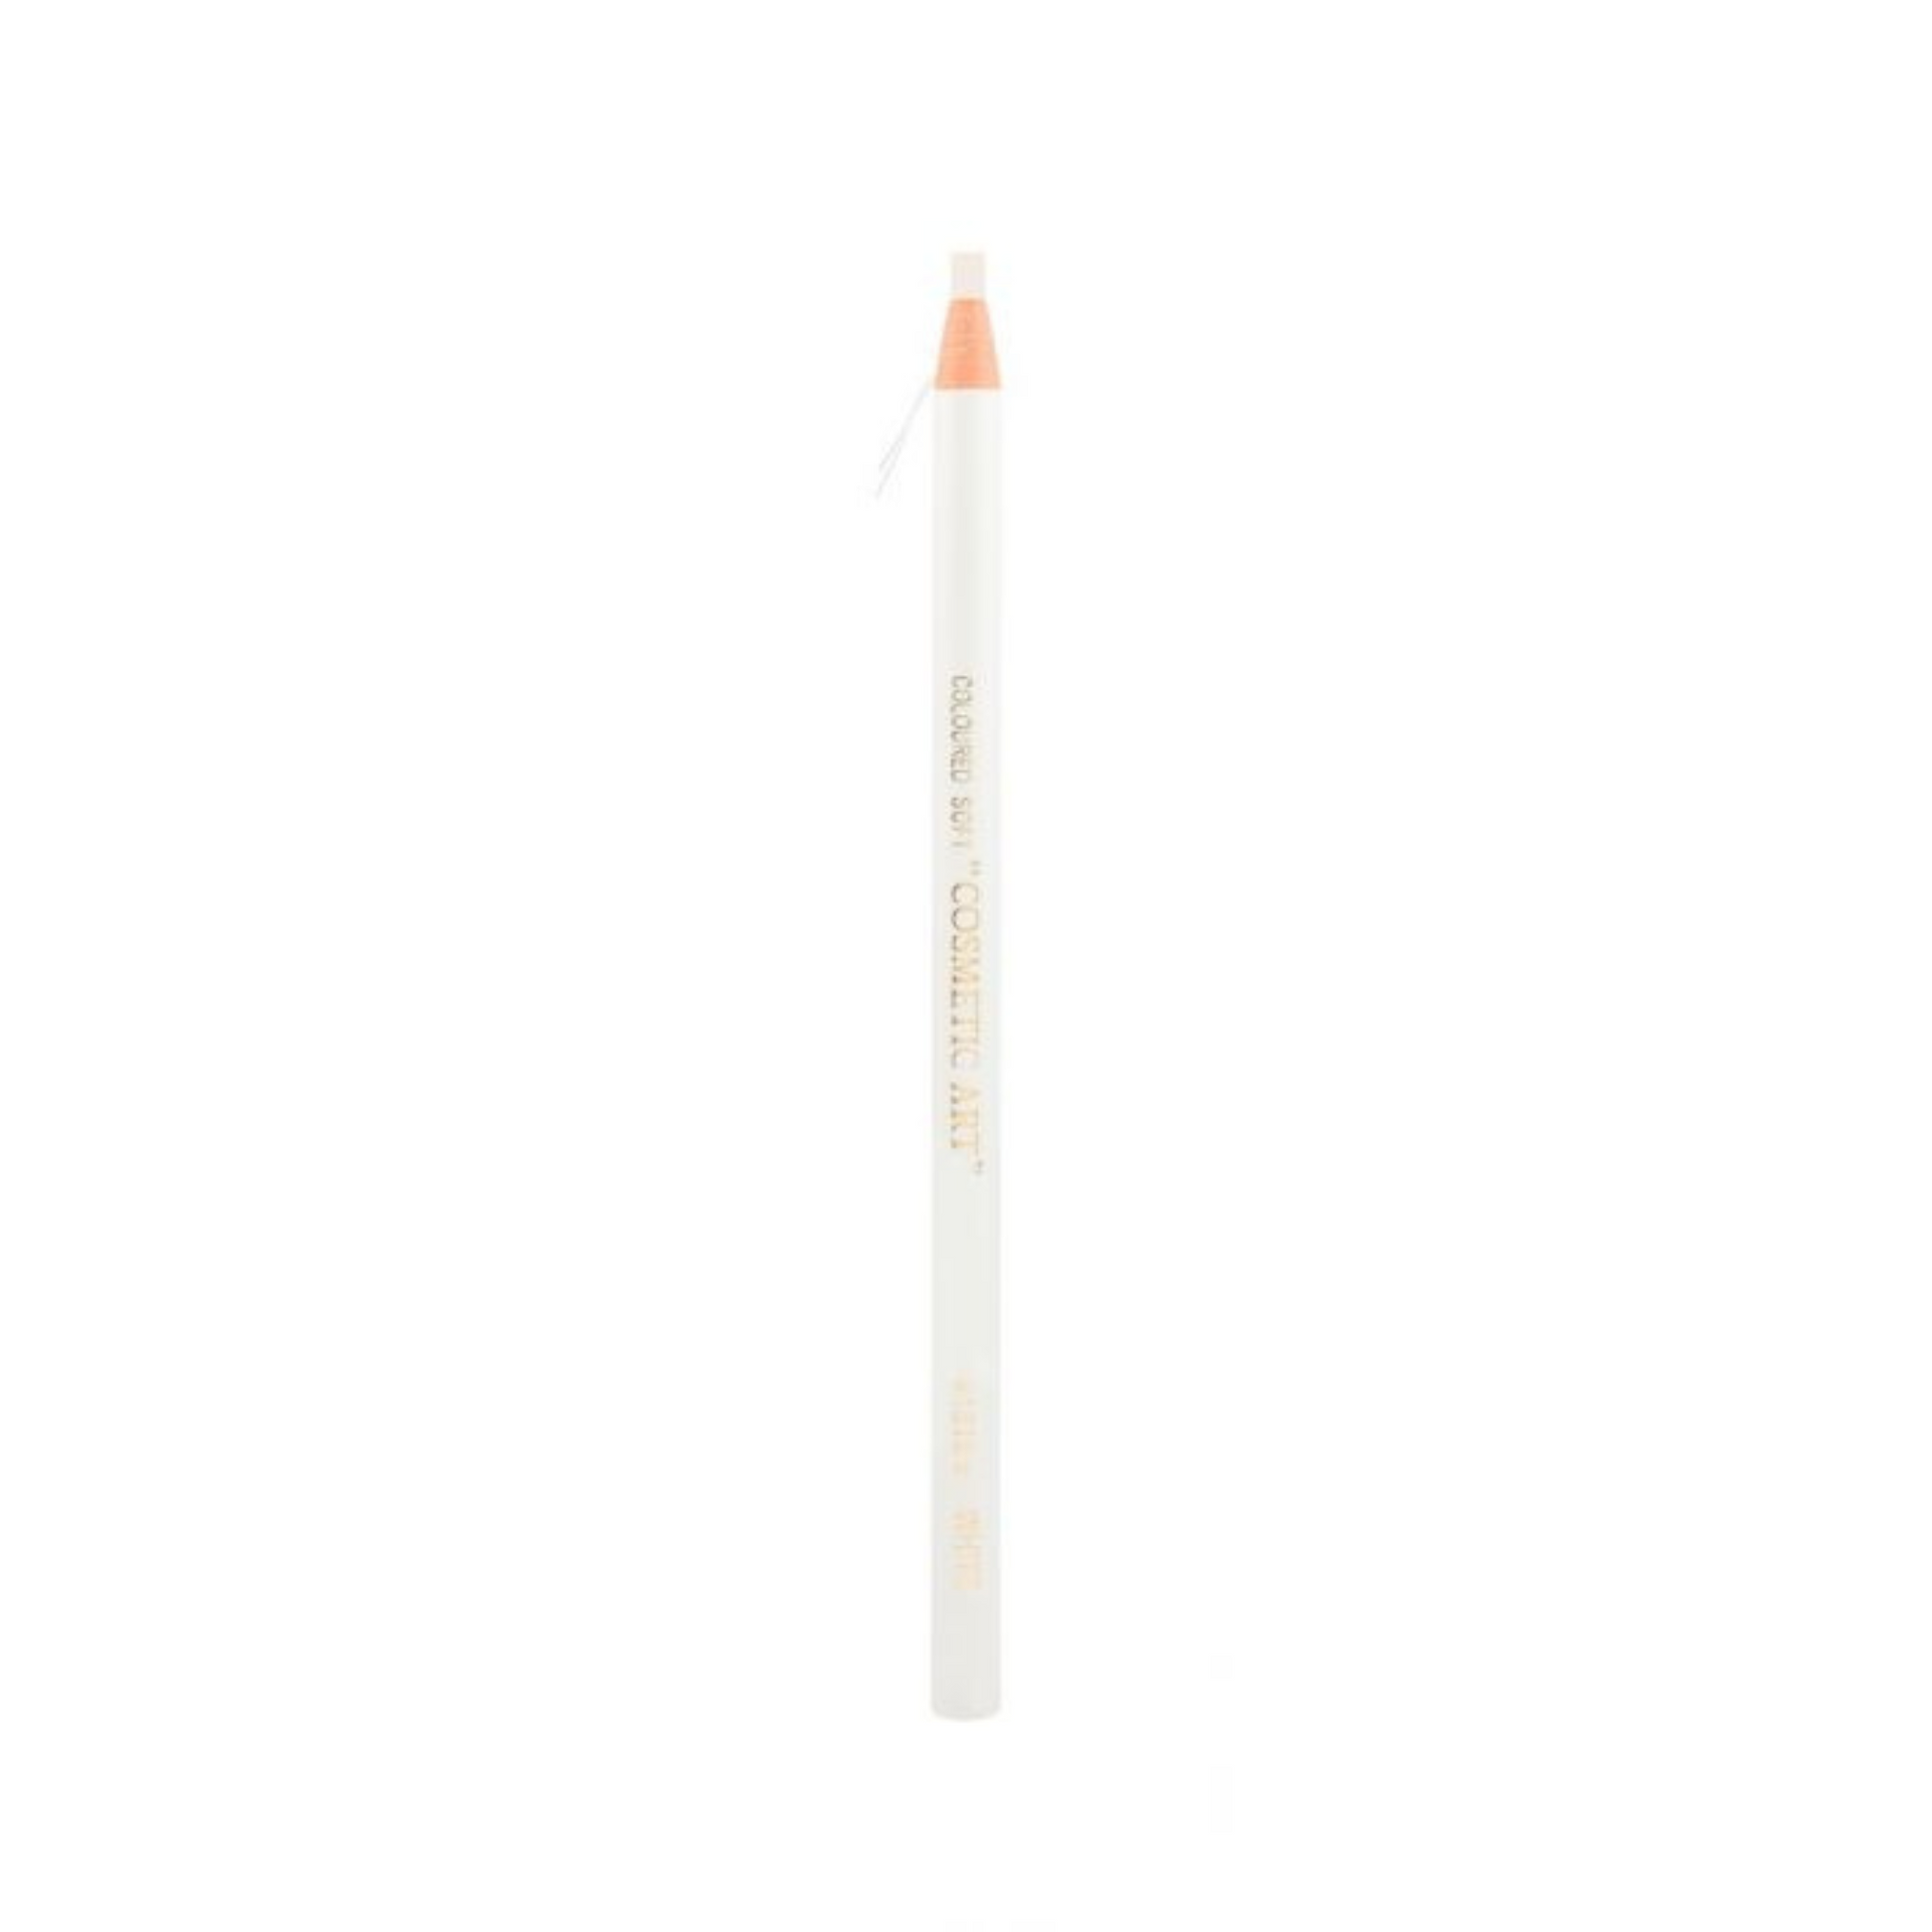 Eyebrow Mapping Pencil - White